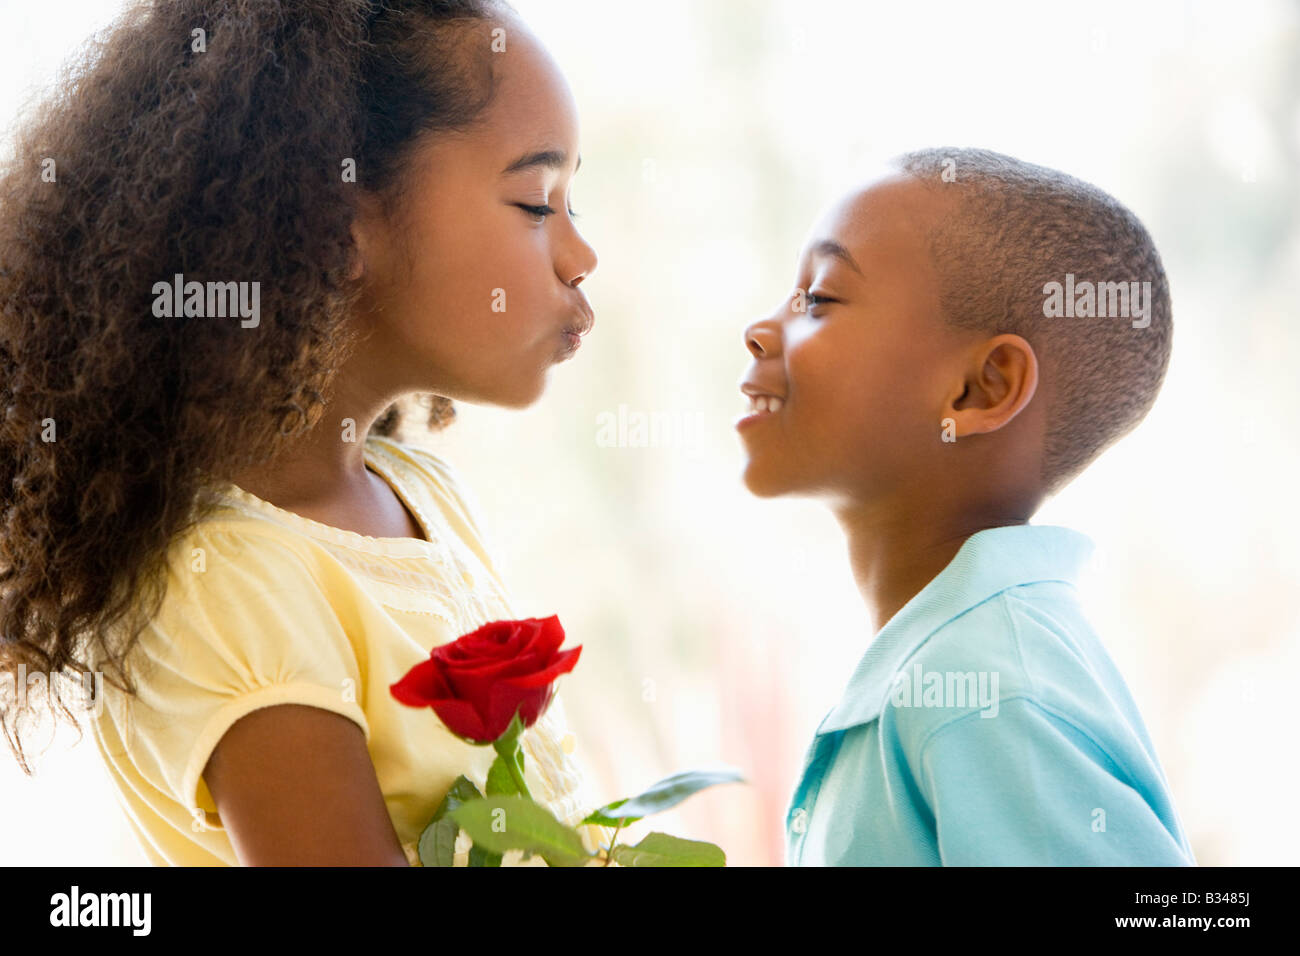 Young boy giving young girl rose and smiling Stock Photo